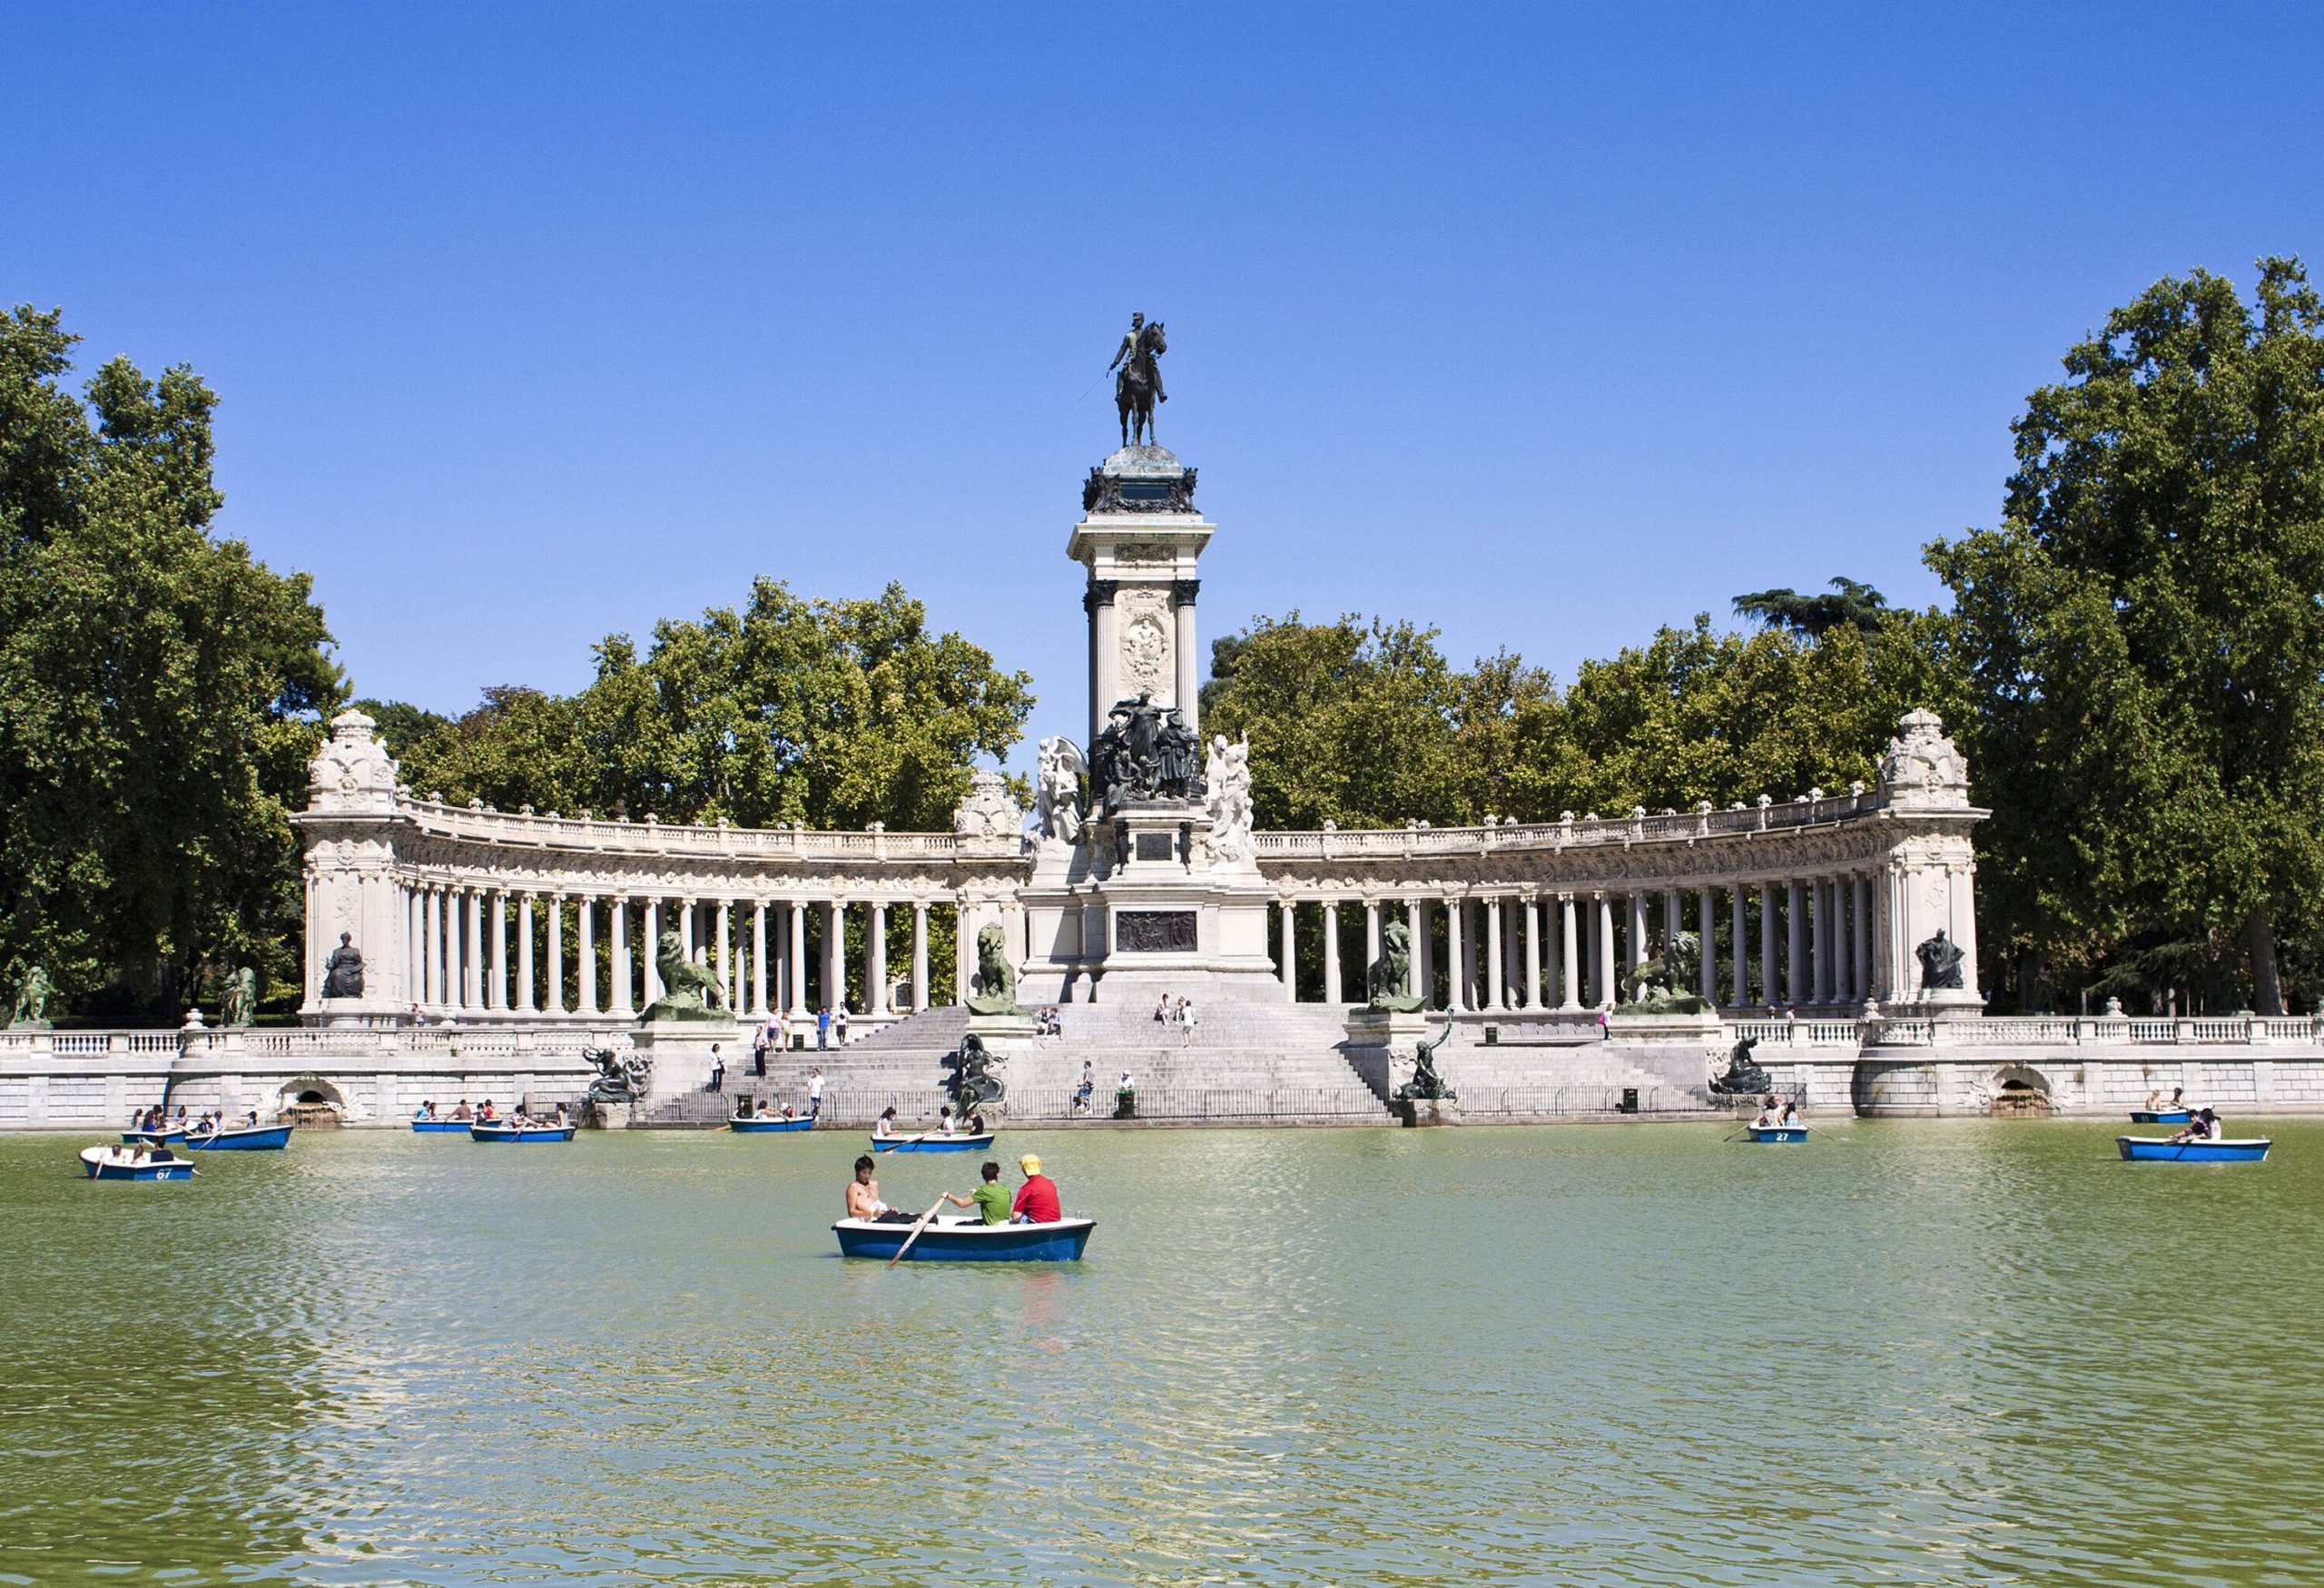 A park's pillared monument with a bronze statue of a person riding a horse overlooking a lake full of people on boats.